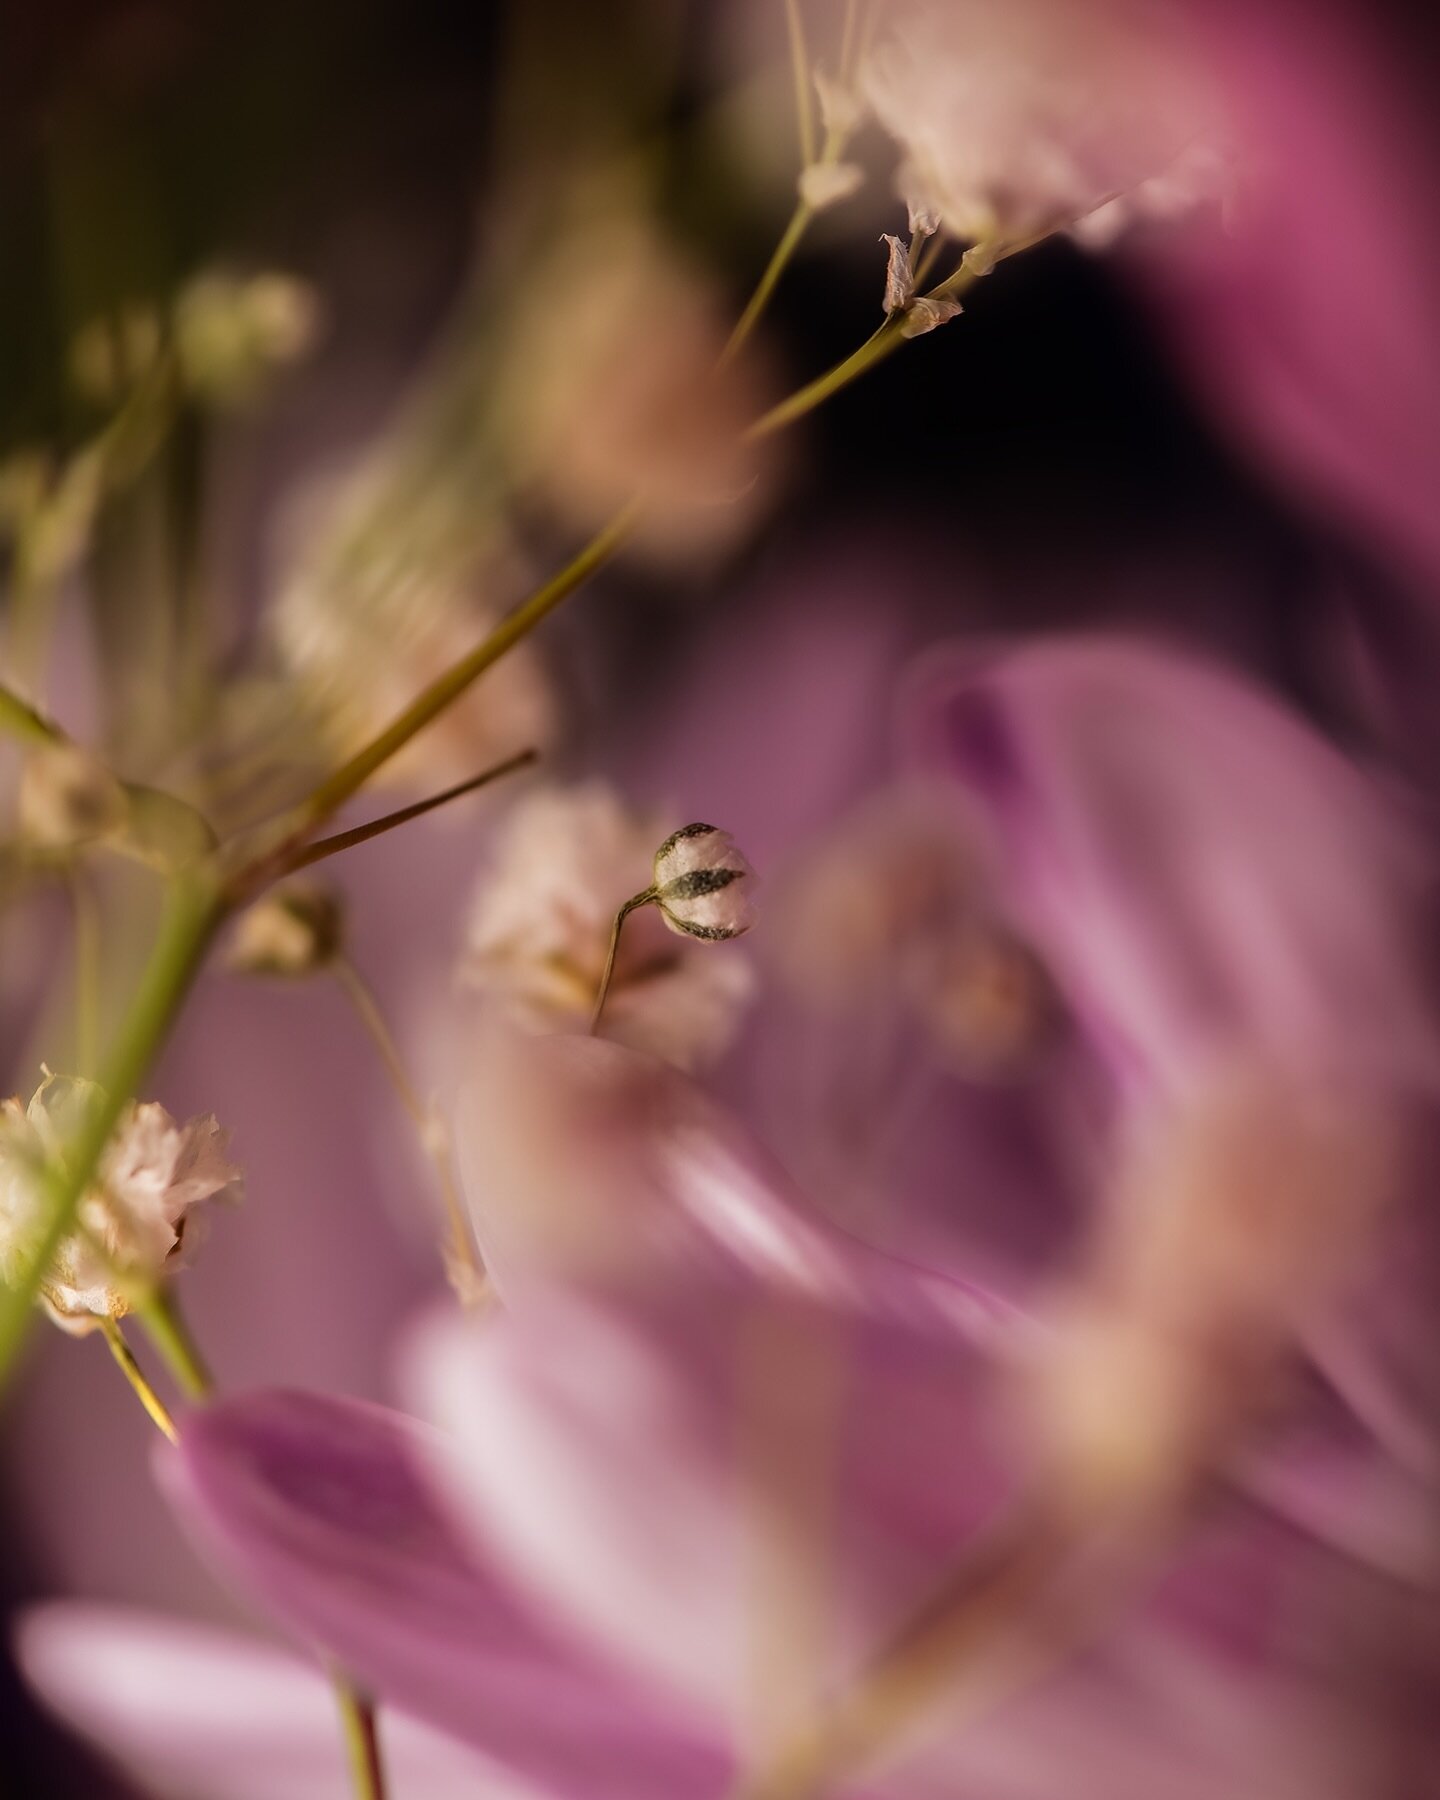 I read a quote today that said &ldquo;We suffer more from our imagination than in actual reality.&rdquo; 

I&rsquo;m not sure how I feel about how that makes me feel&hellip;

#amberfitephotography #macrophotography #flowerphotography #flower #bloom #